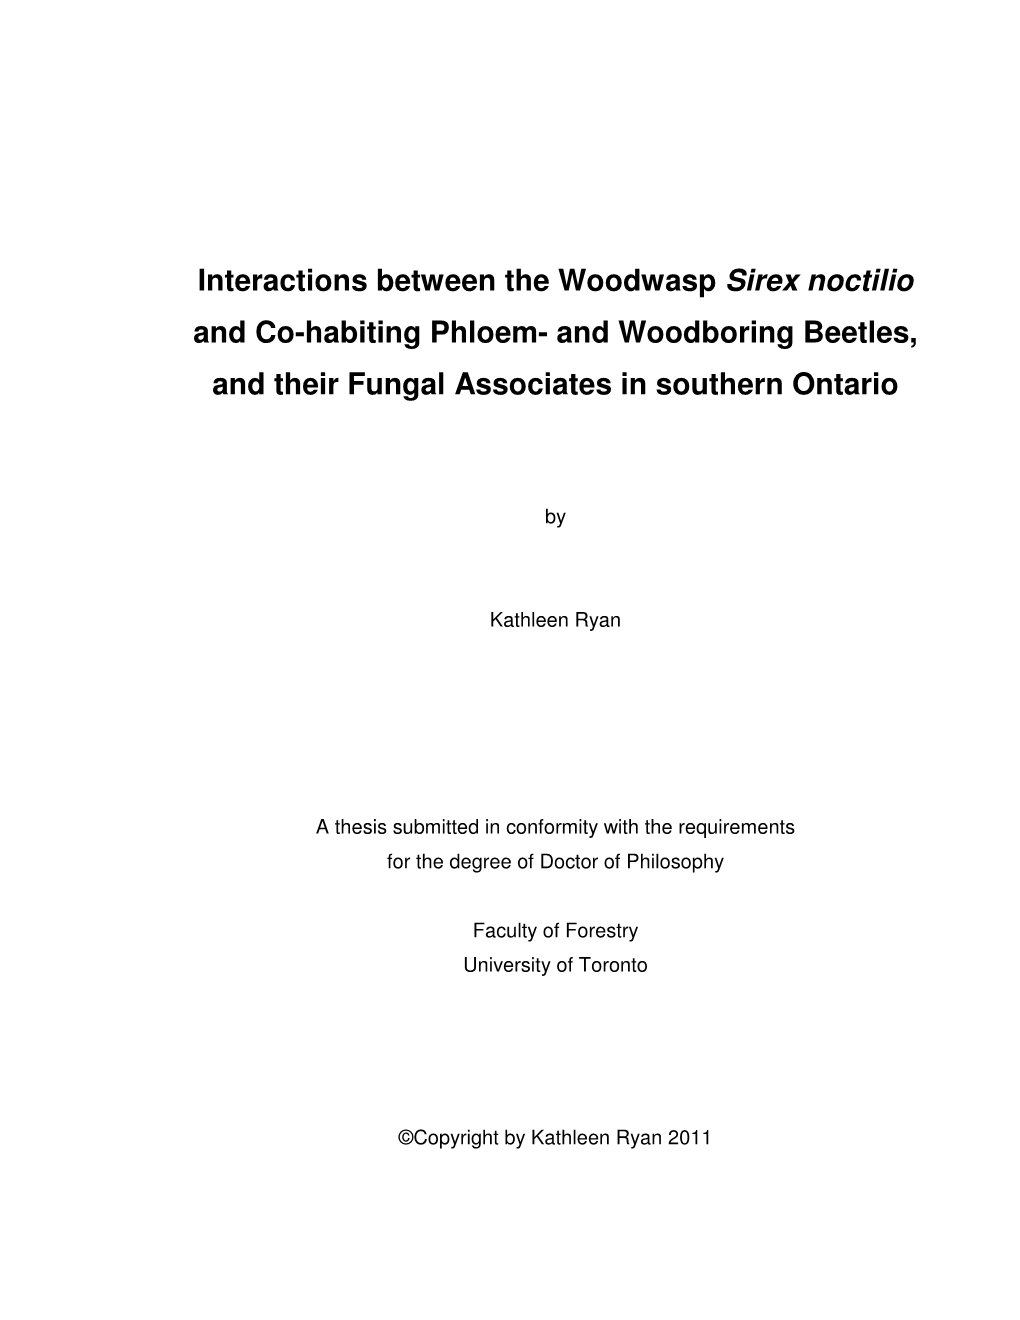 Interactions Between the Woodwasp Sirex Noctilio and Co-Habiting Phloem- and Woodboring Beetles, and Their Fungal Associates in Southern Ontario